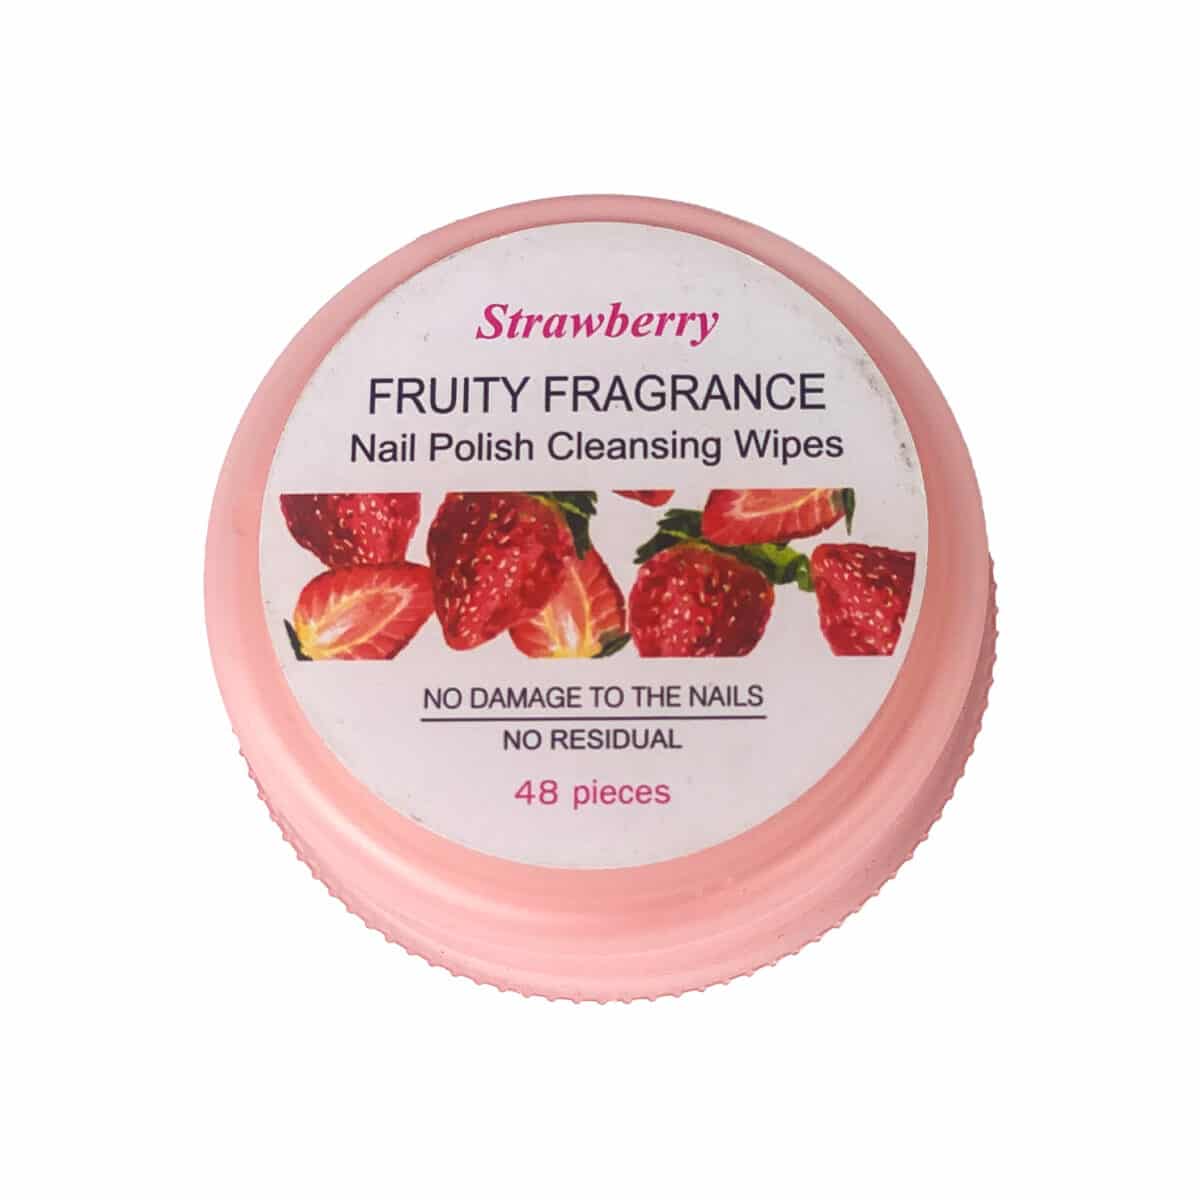 Miniso Nail Polish Cleansing Wipes Strawberry Fragrance